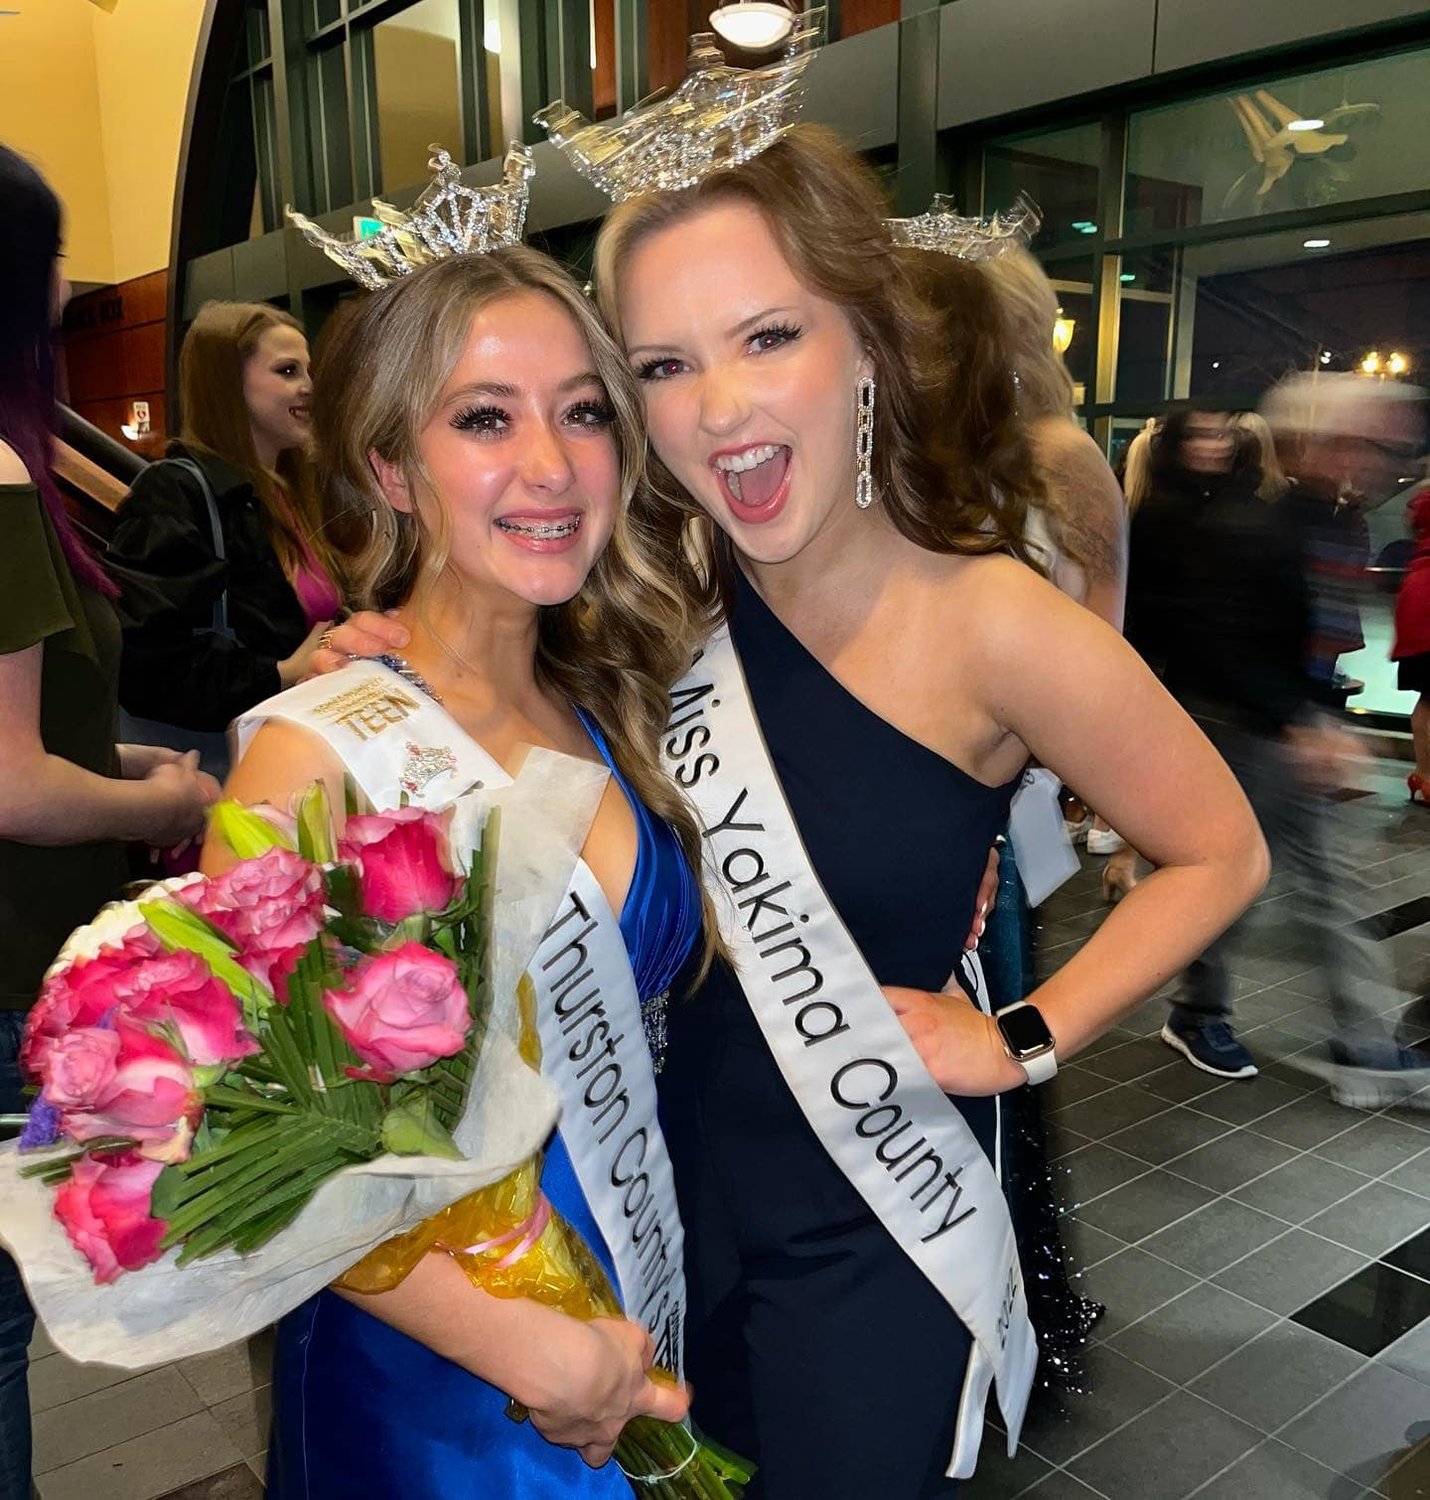 Charlease Hyder, of Yelm, was crowned Miss Thurston County’s Outstanding Teen. Hyder is pictured here with Miss Yakima County.